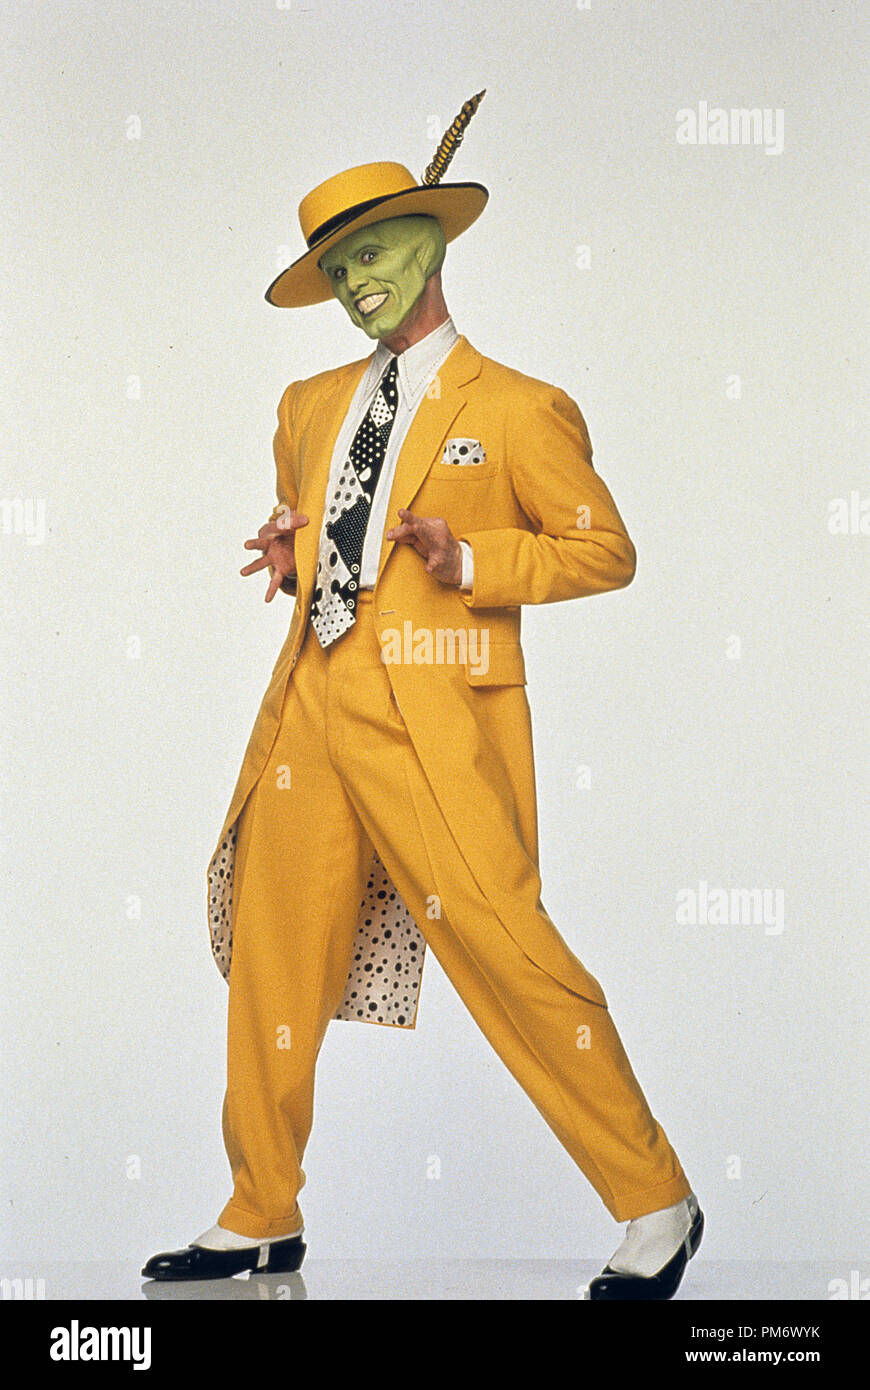 ontbijt overhemd camouflage Film Still from "The Mask" Jim Carrey © 1994 New Line Cinema Photo Credit:  Blake Little File Reference # 31129072THA For Editorial Use Only - All  Rights Reserved Stock Photo - Alamy